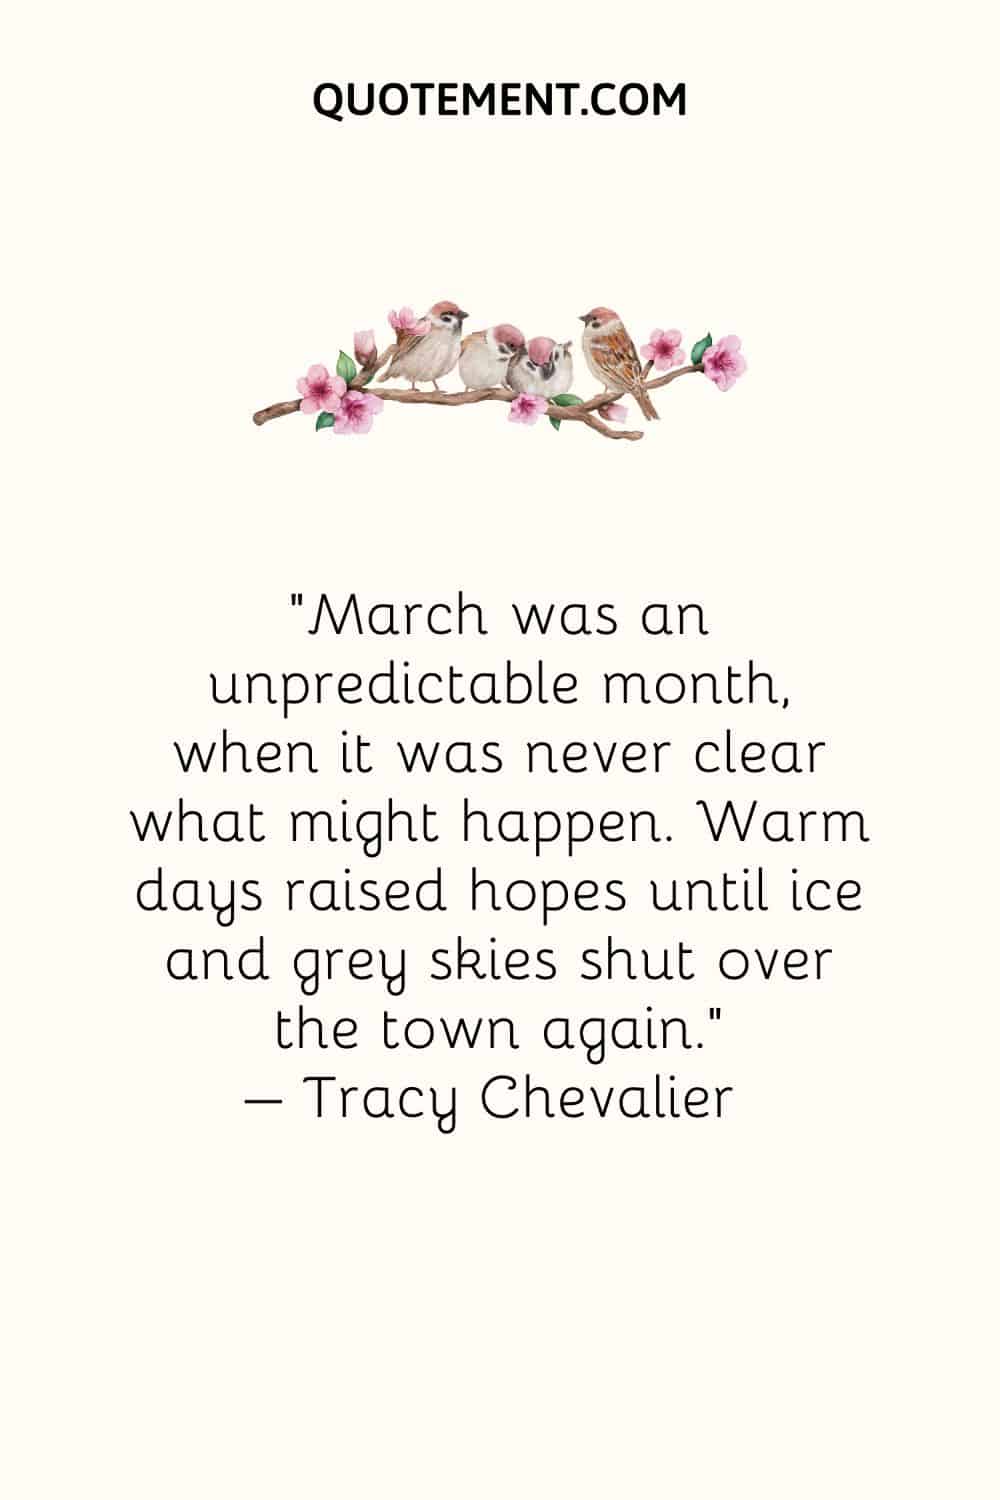 March was an unpredictable month, when it was never clear what might happen. Warm days raised hopes until ice and grey skies shut over the town again.